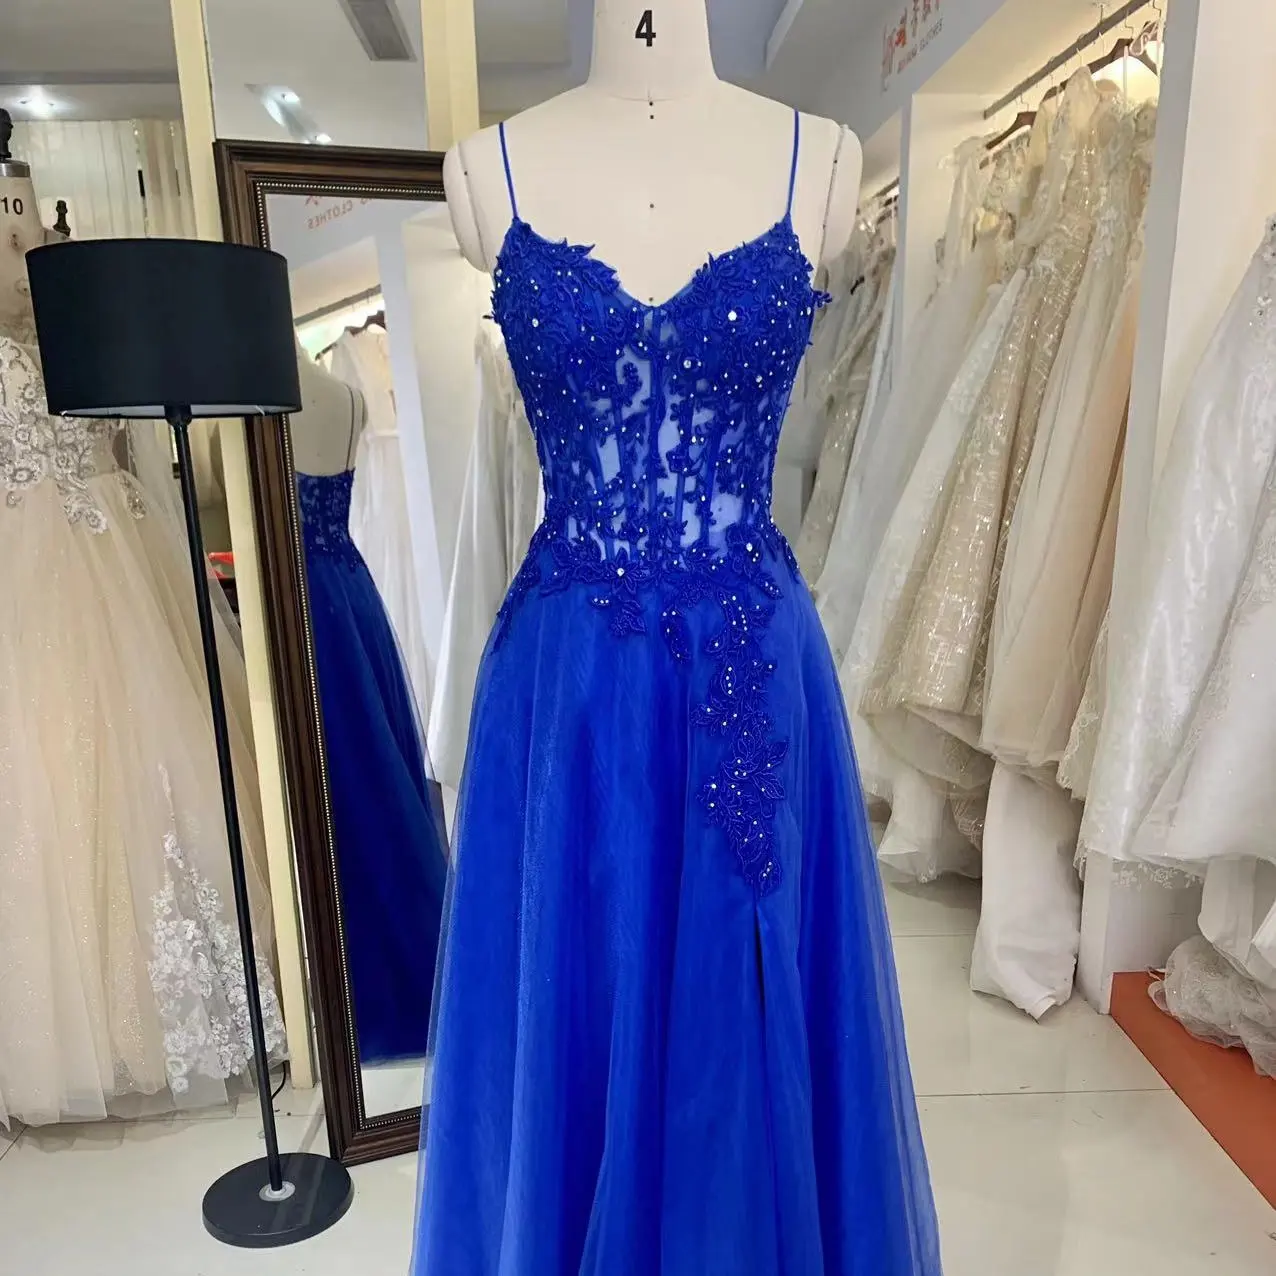 Royal Blue Fitted Corset Boning Bodice A Line Princess Skirt Sexy High Slit Prom Dress